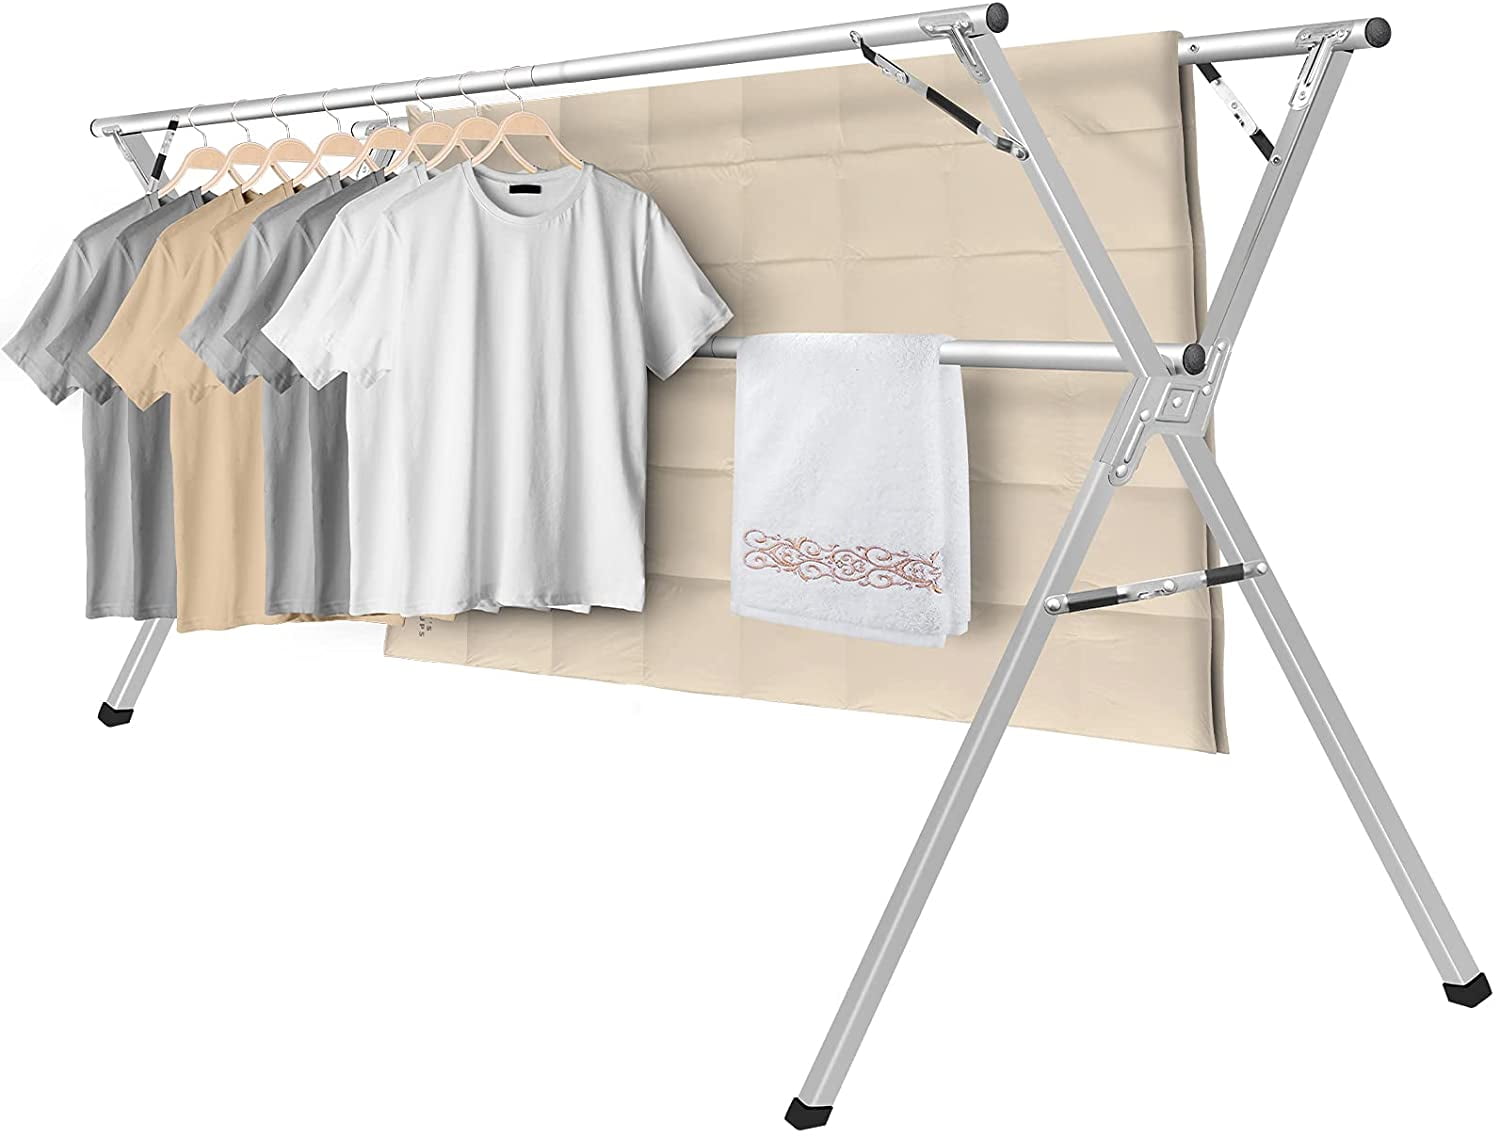 Anti-Wind Folding Drying Rack Hanging Clothes Laundry Sweater Basket Drying Mesh 